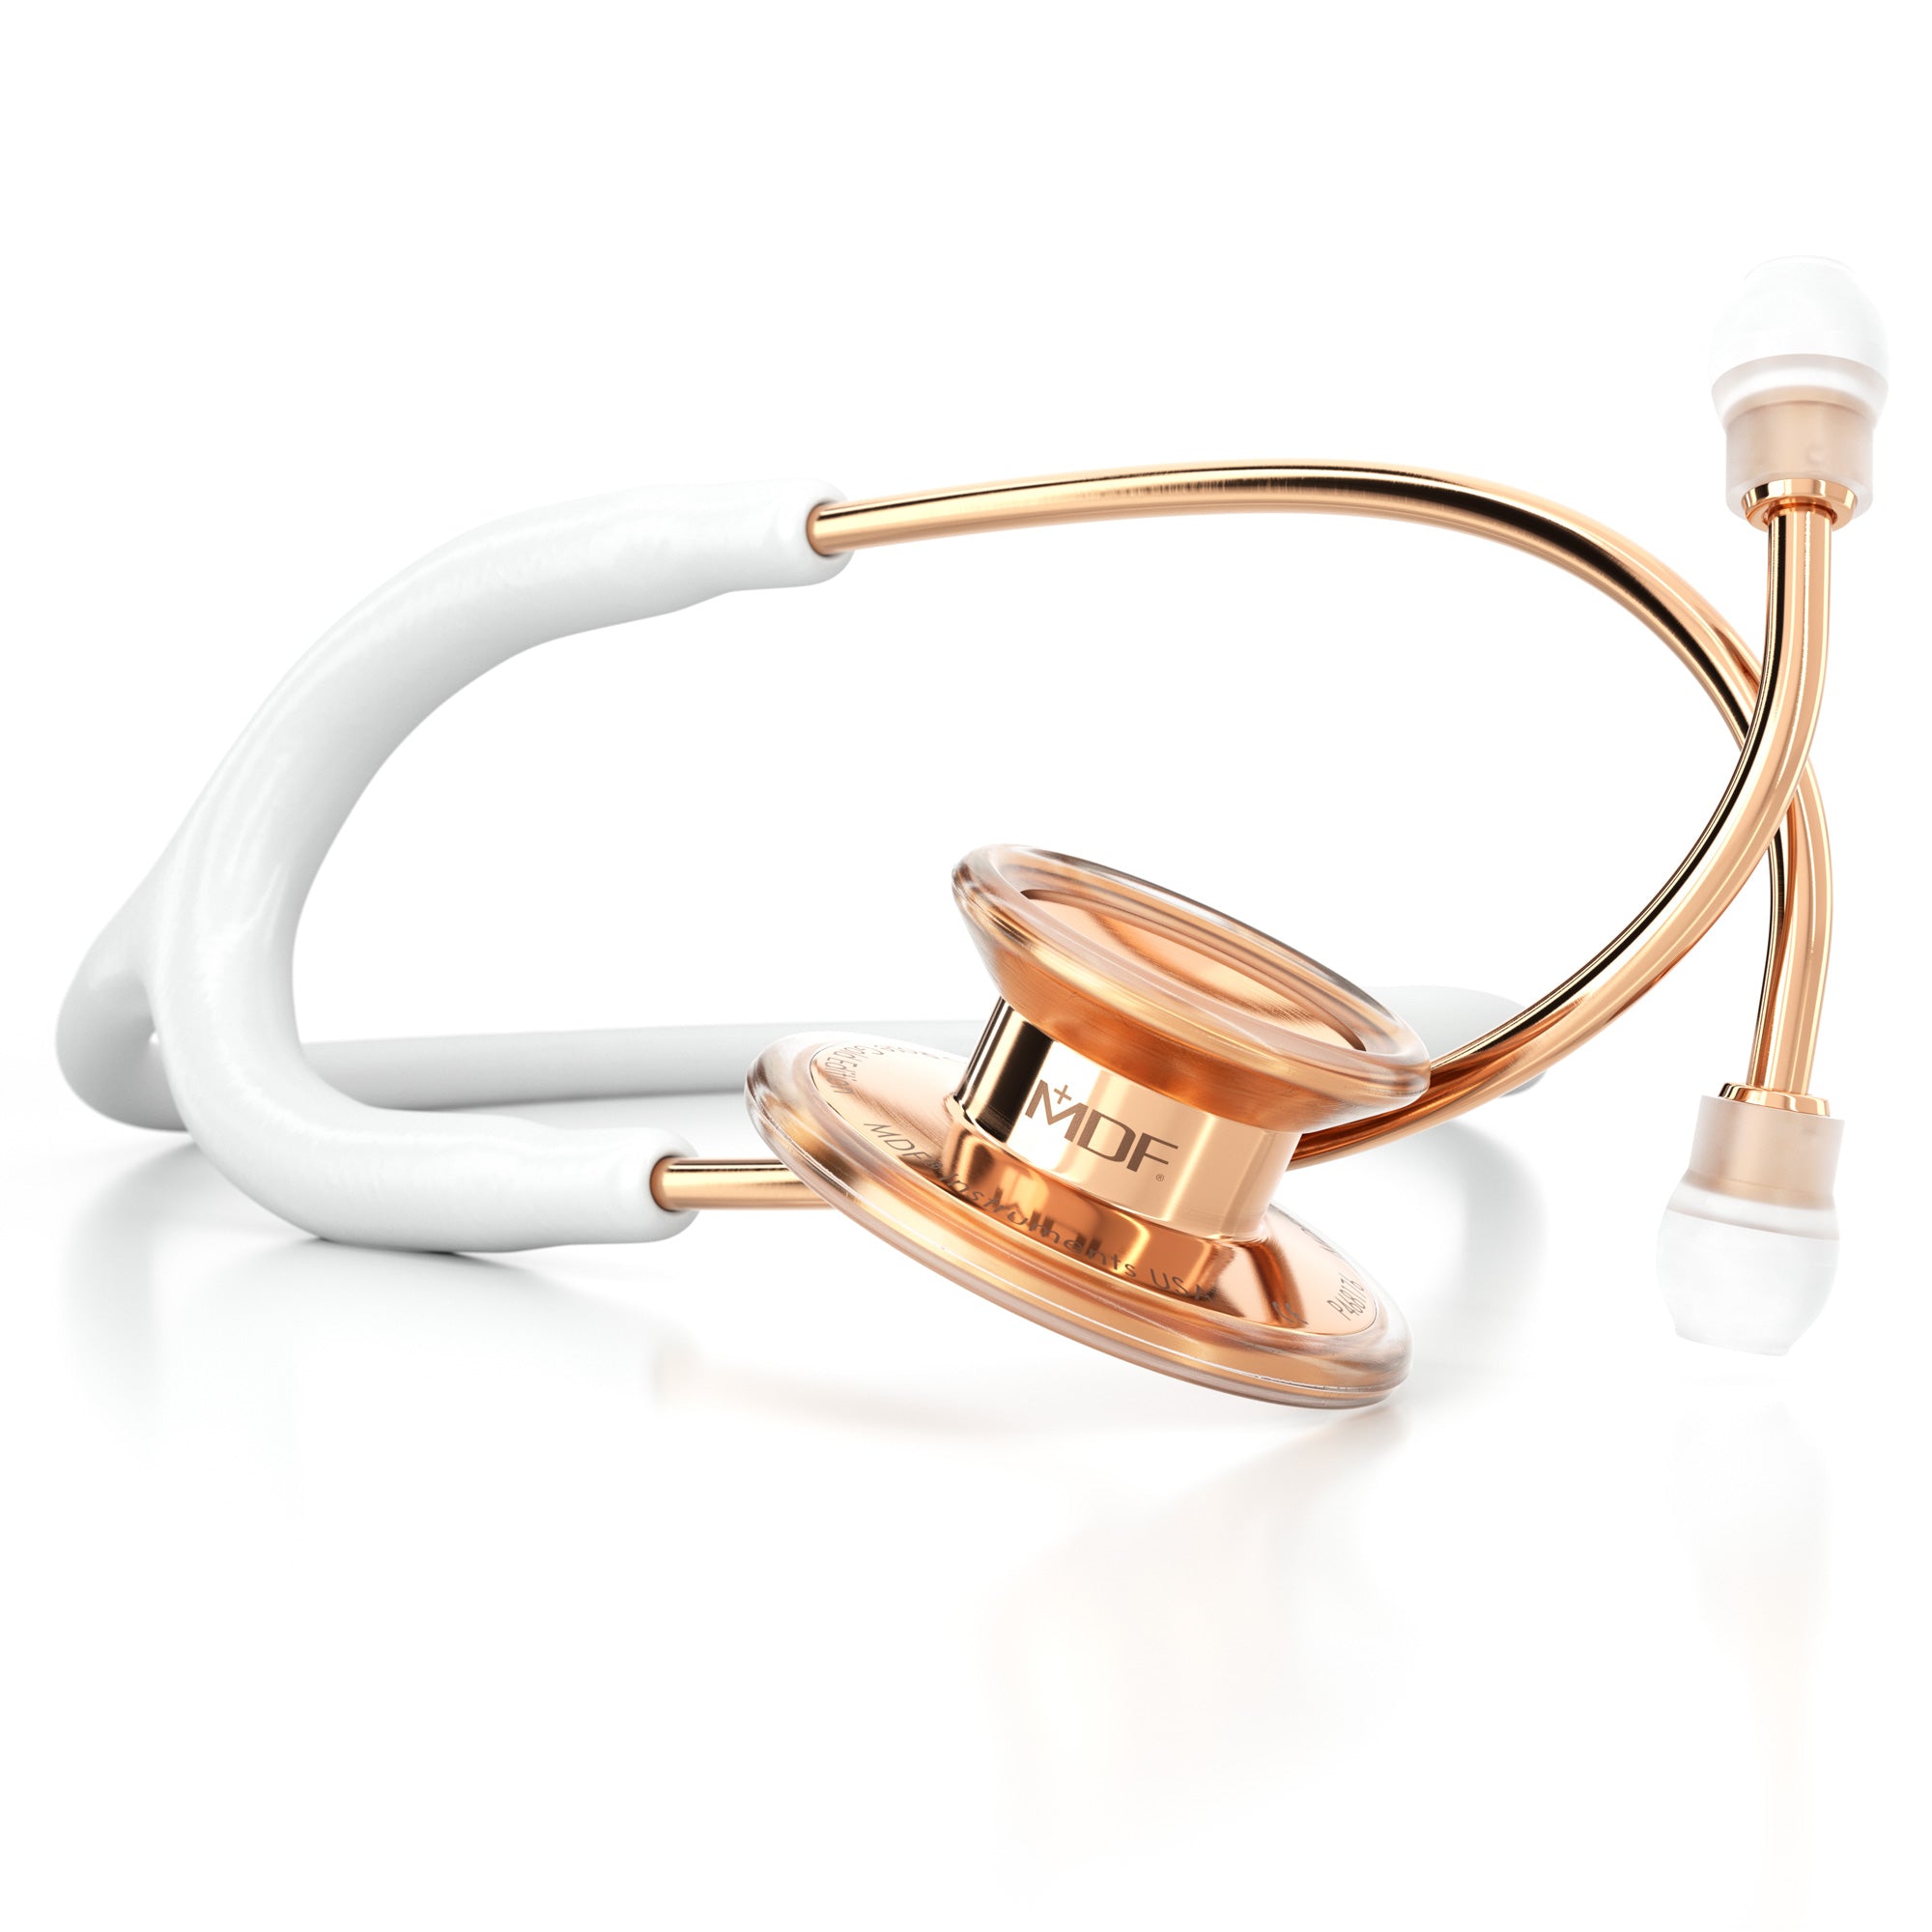 MD One® Adult Stethoscope - White/Rose Gold - MDF Instruments Official Store - No - Stethoscope